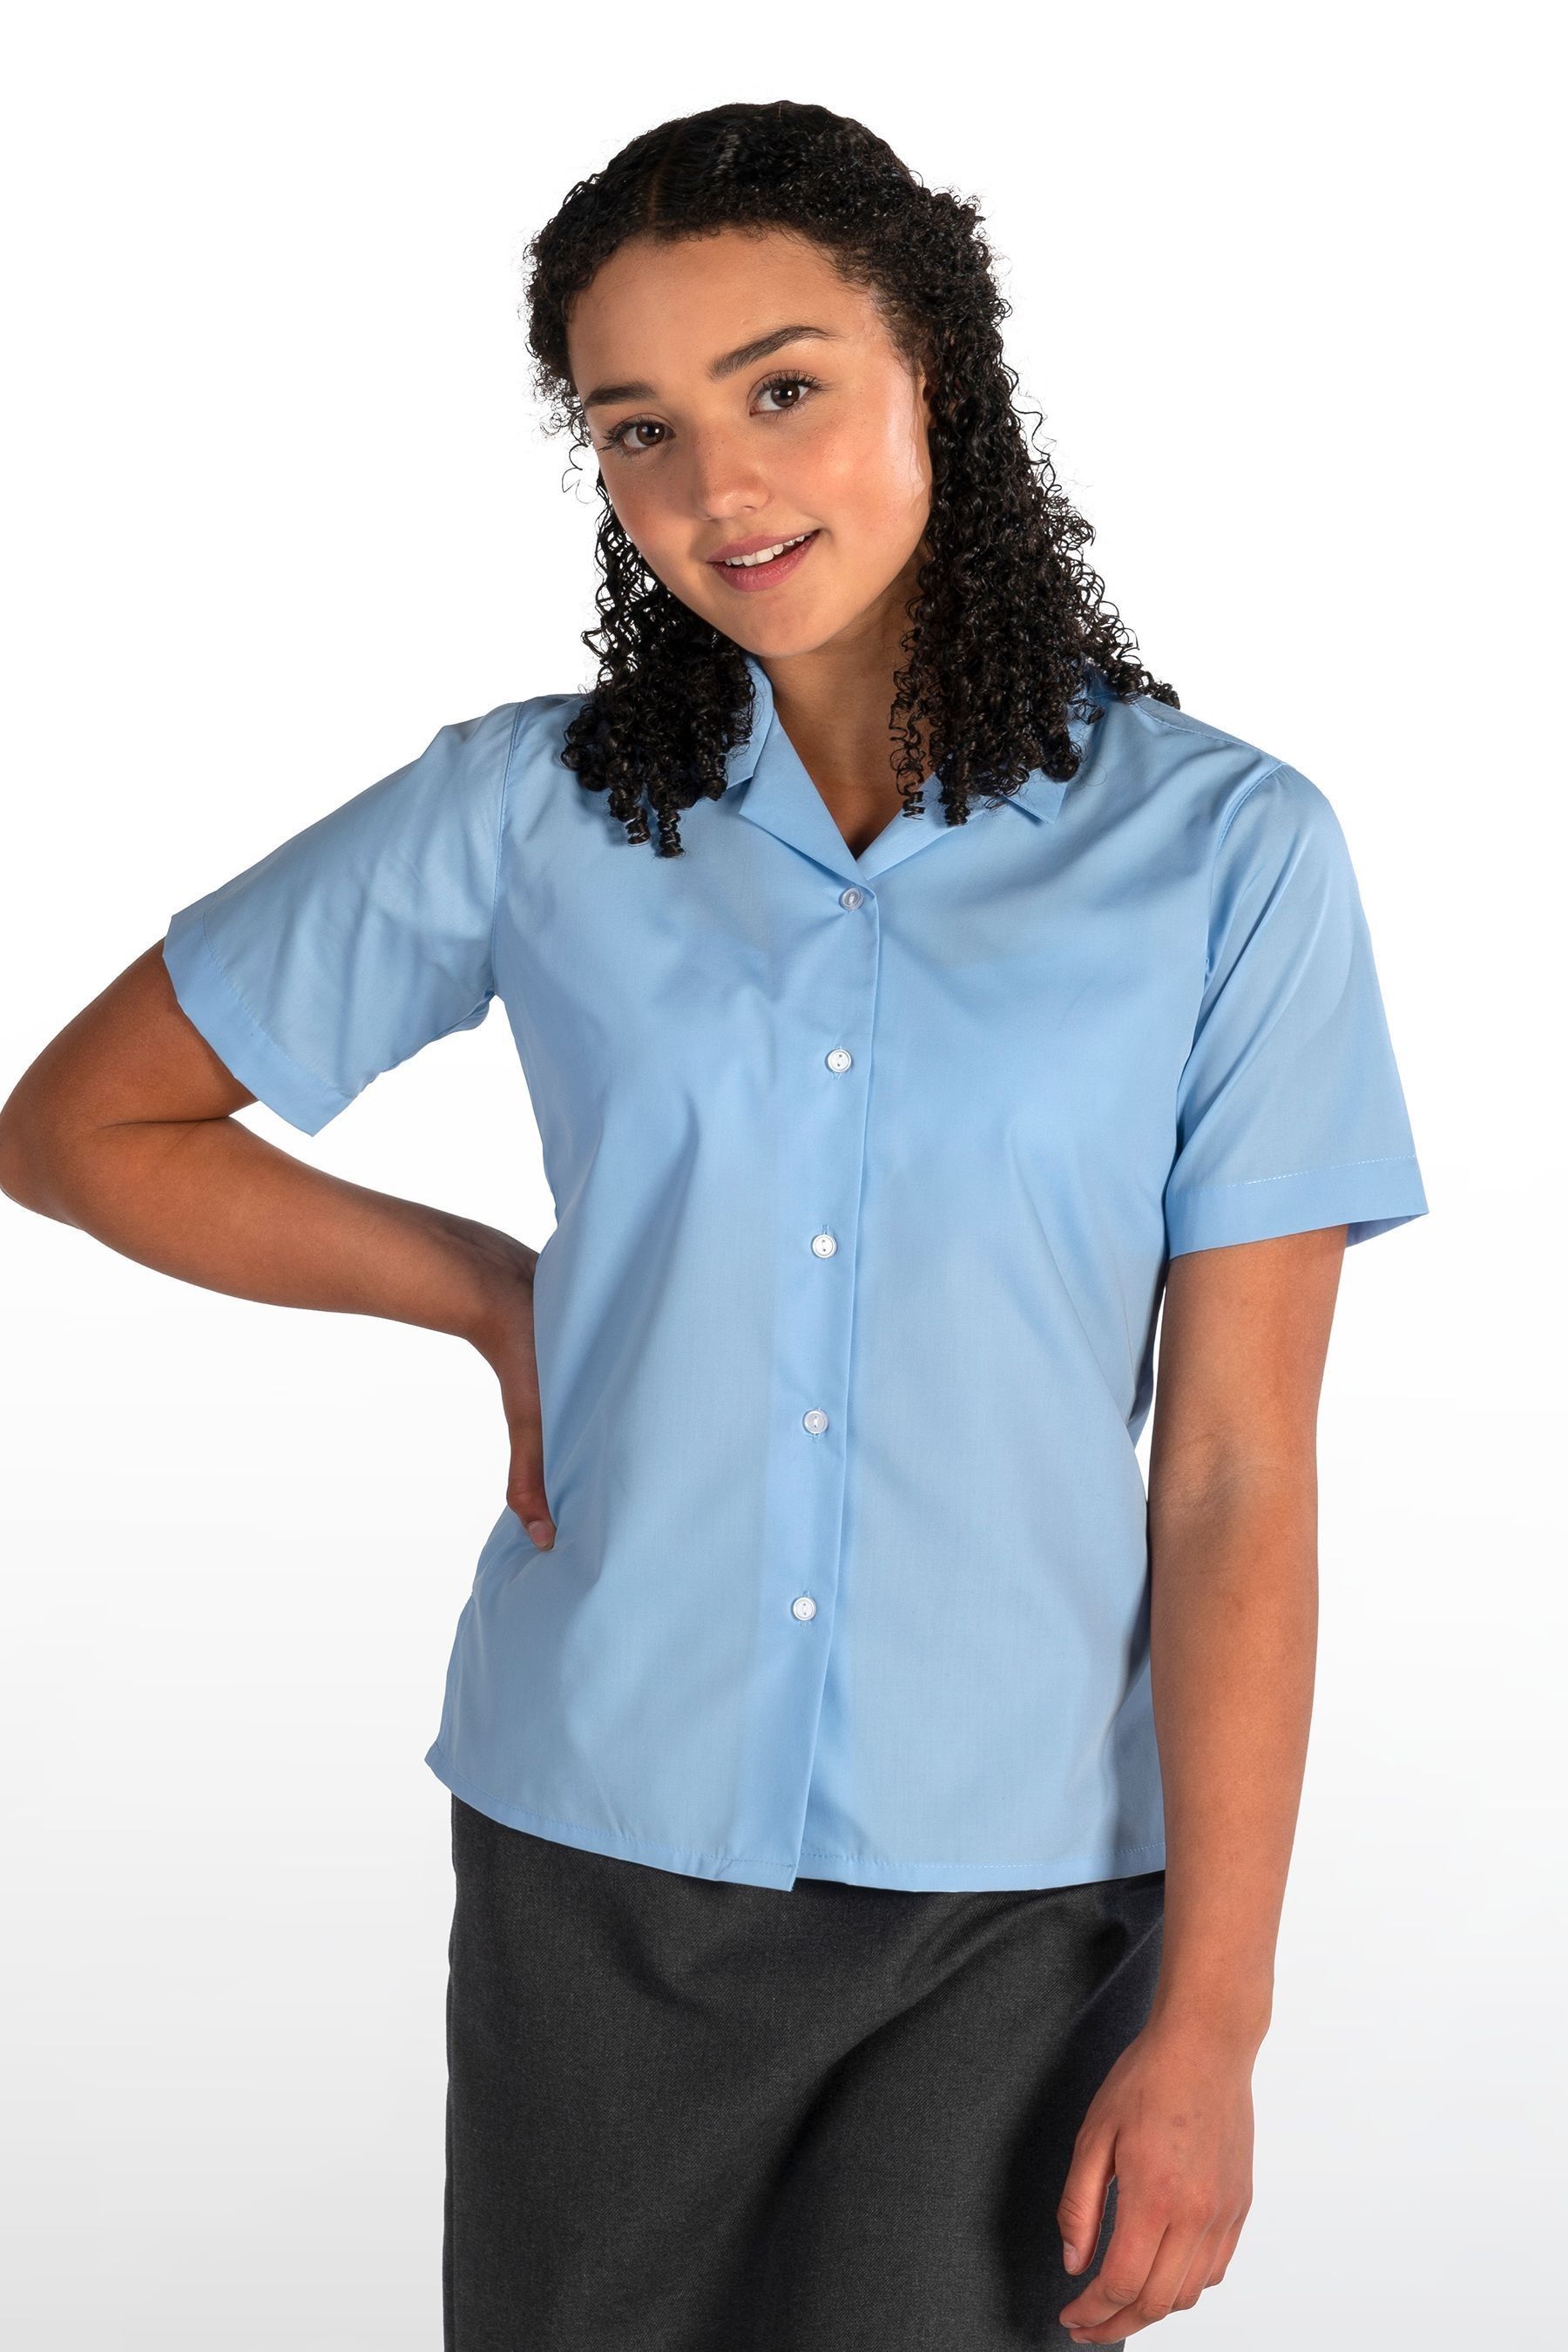 Buy Trutex Blue Revere Non Iron Short Sleeve Fitted Blouses 2 Pack from ...